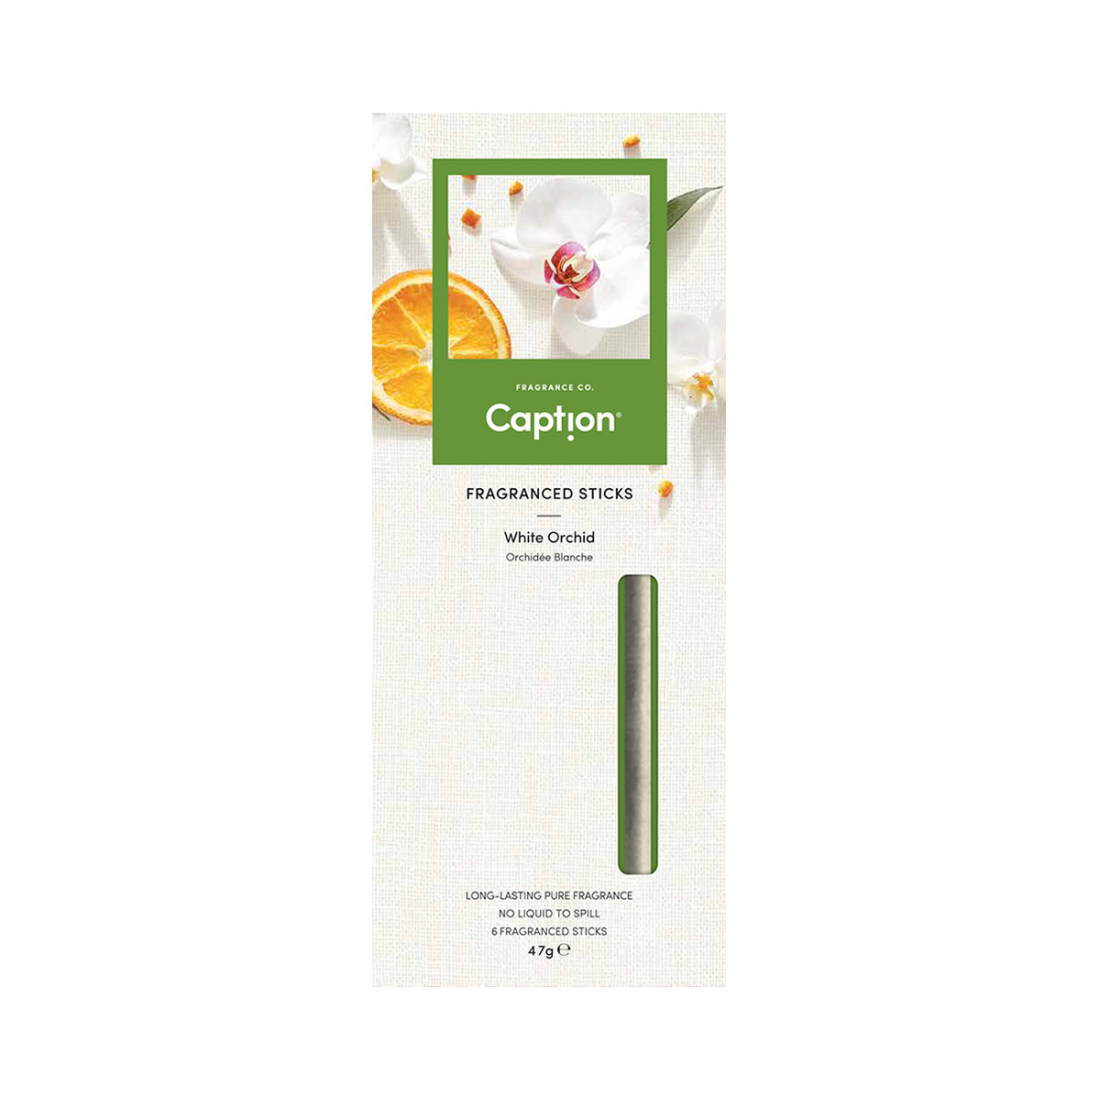 'White Orchid' Scented Sticks - 6 Pieces